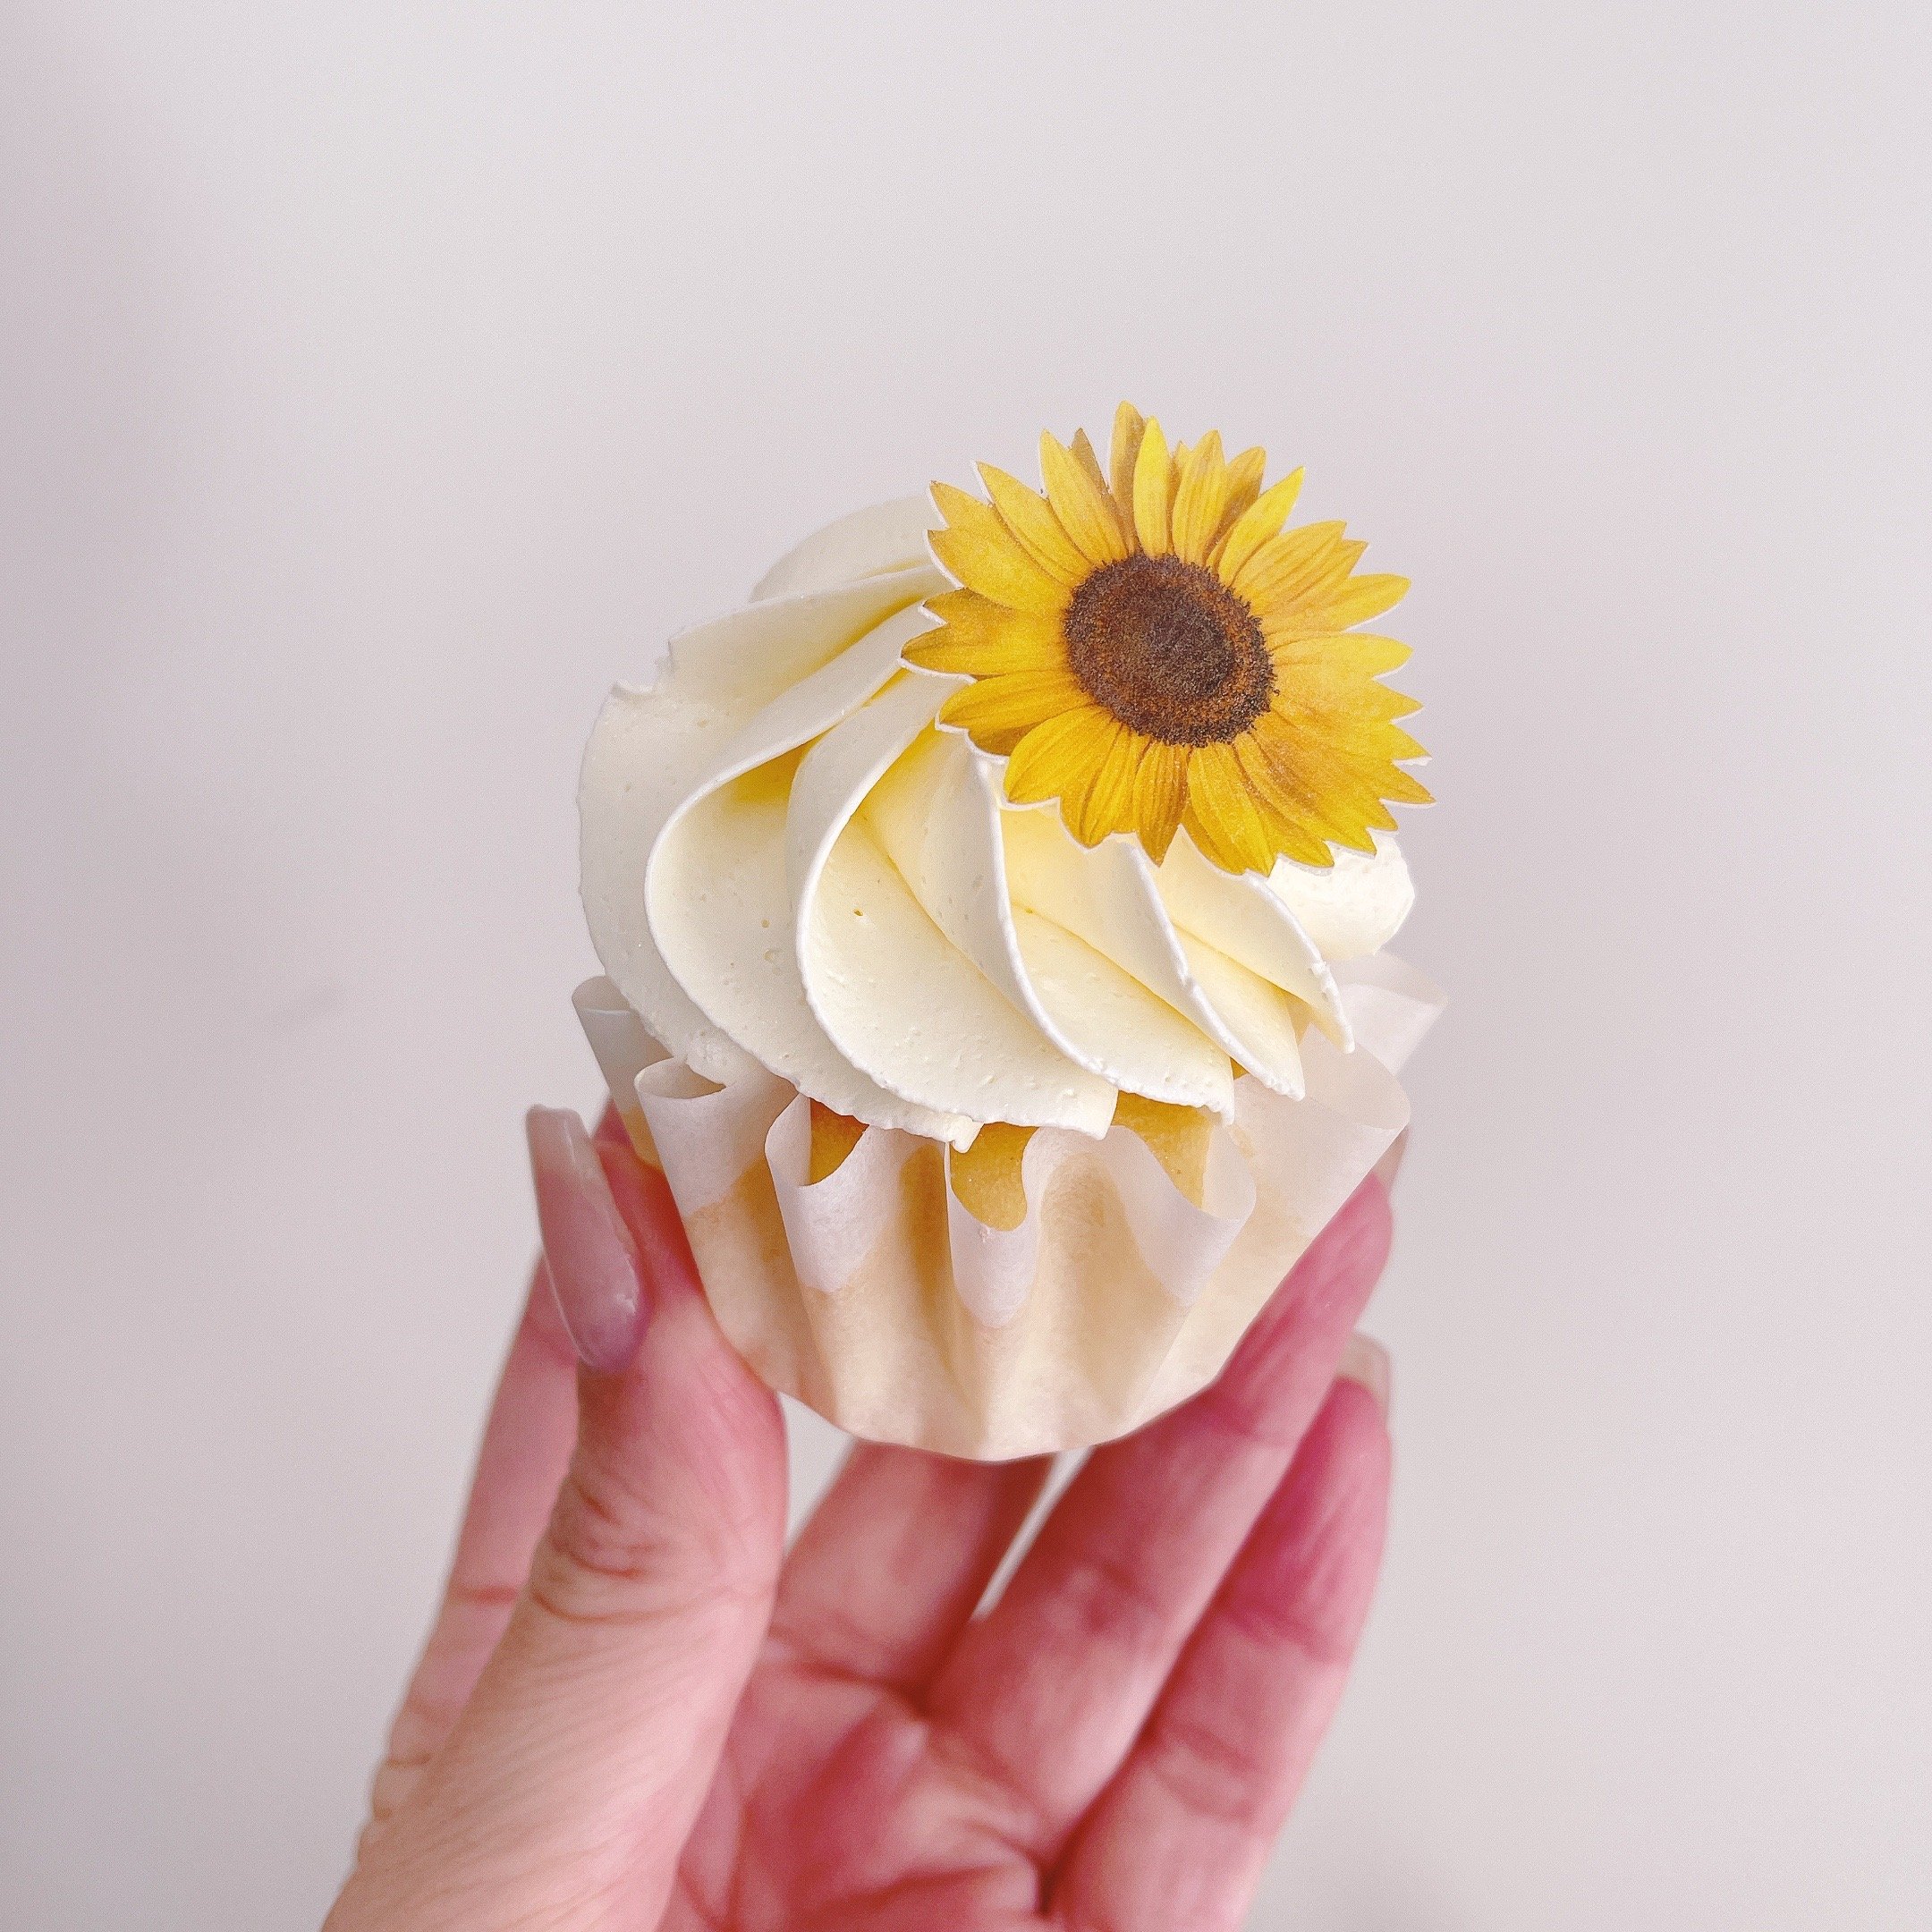 Personalised Sunflowers with bow  7.5" Edible Wafer Paper Cake Topper flowers 